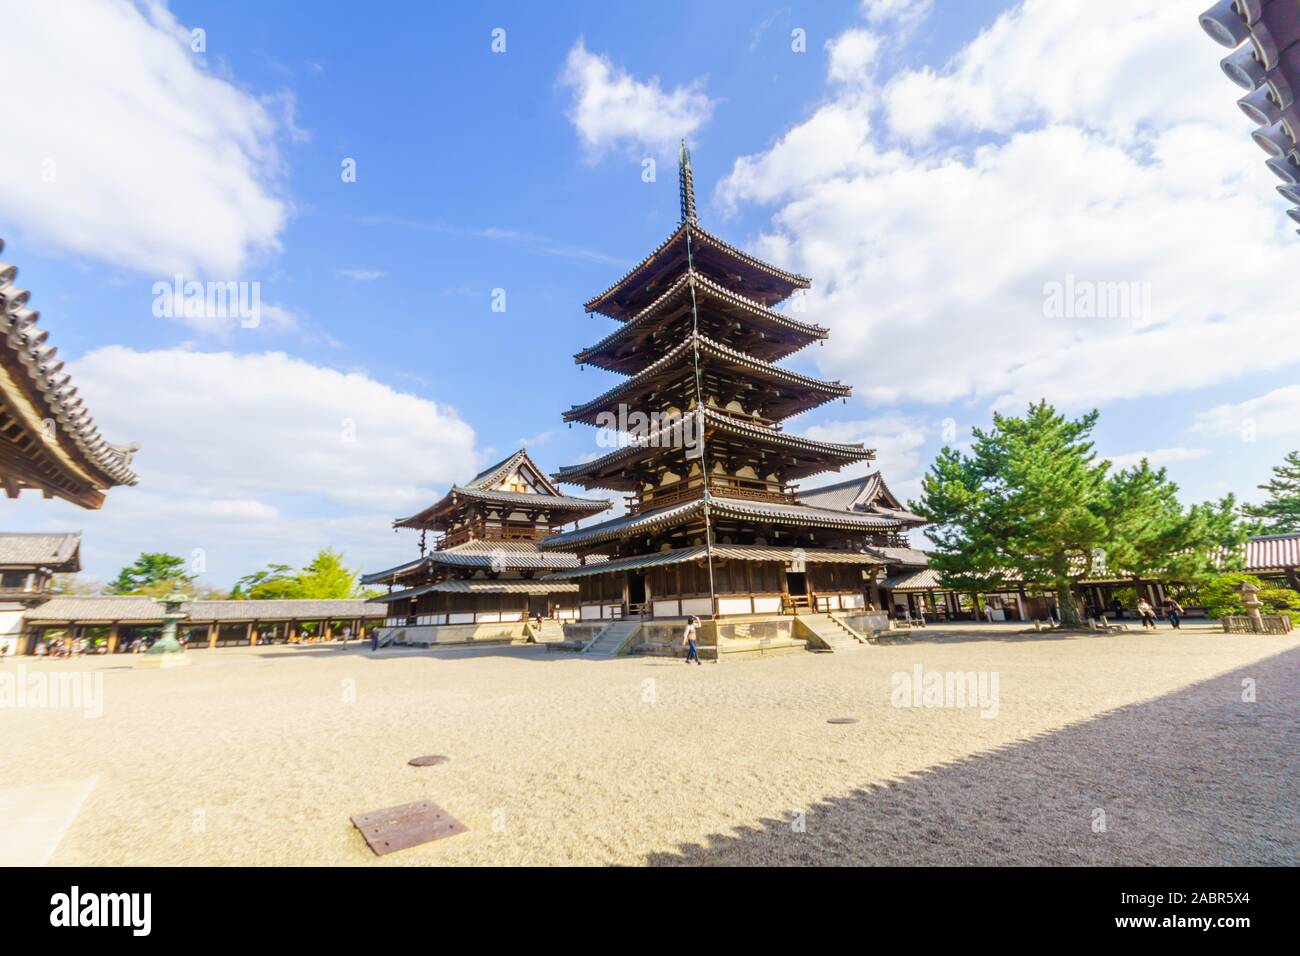 Ikaruga, Japan - October 5, 2019: View of the Horyu-ji compound and pagoda, with visitors, it is a Buddhist temple in Ikaruga, Nara prefecture, Japan Stock Photo